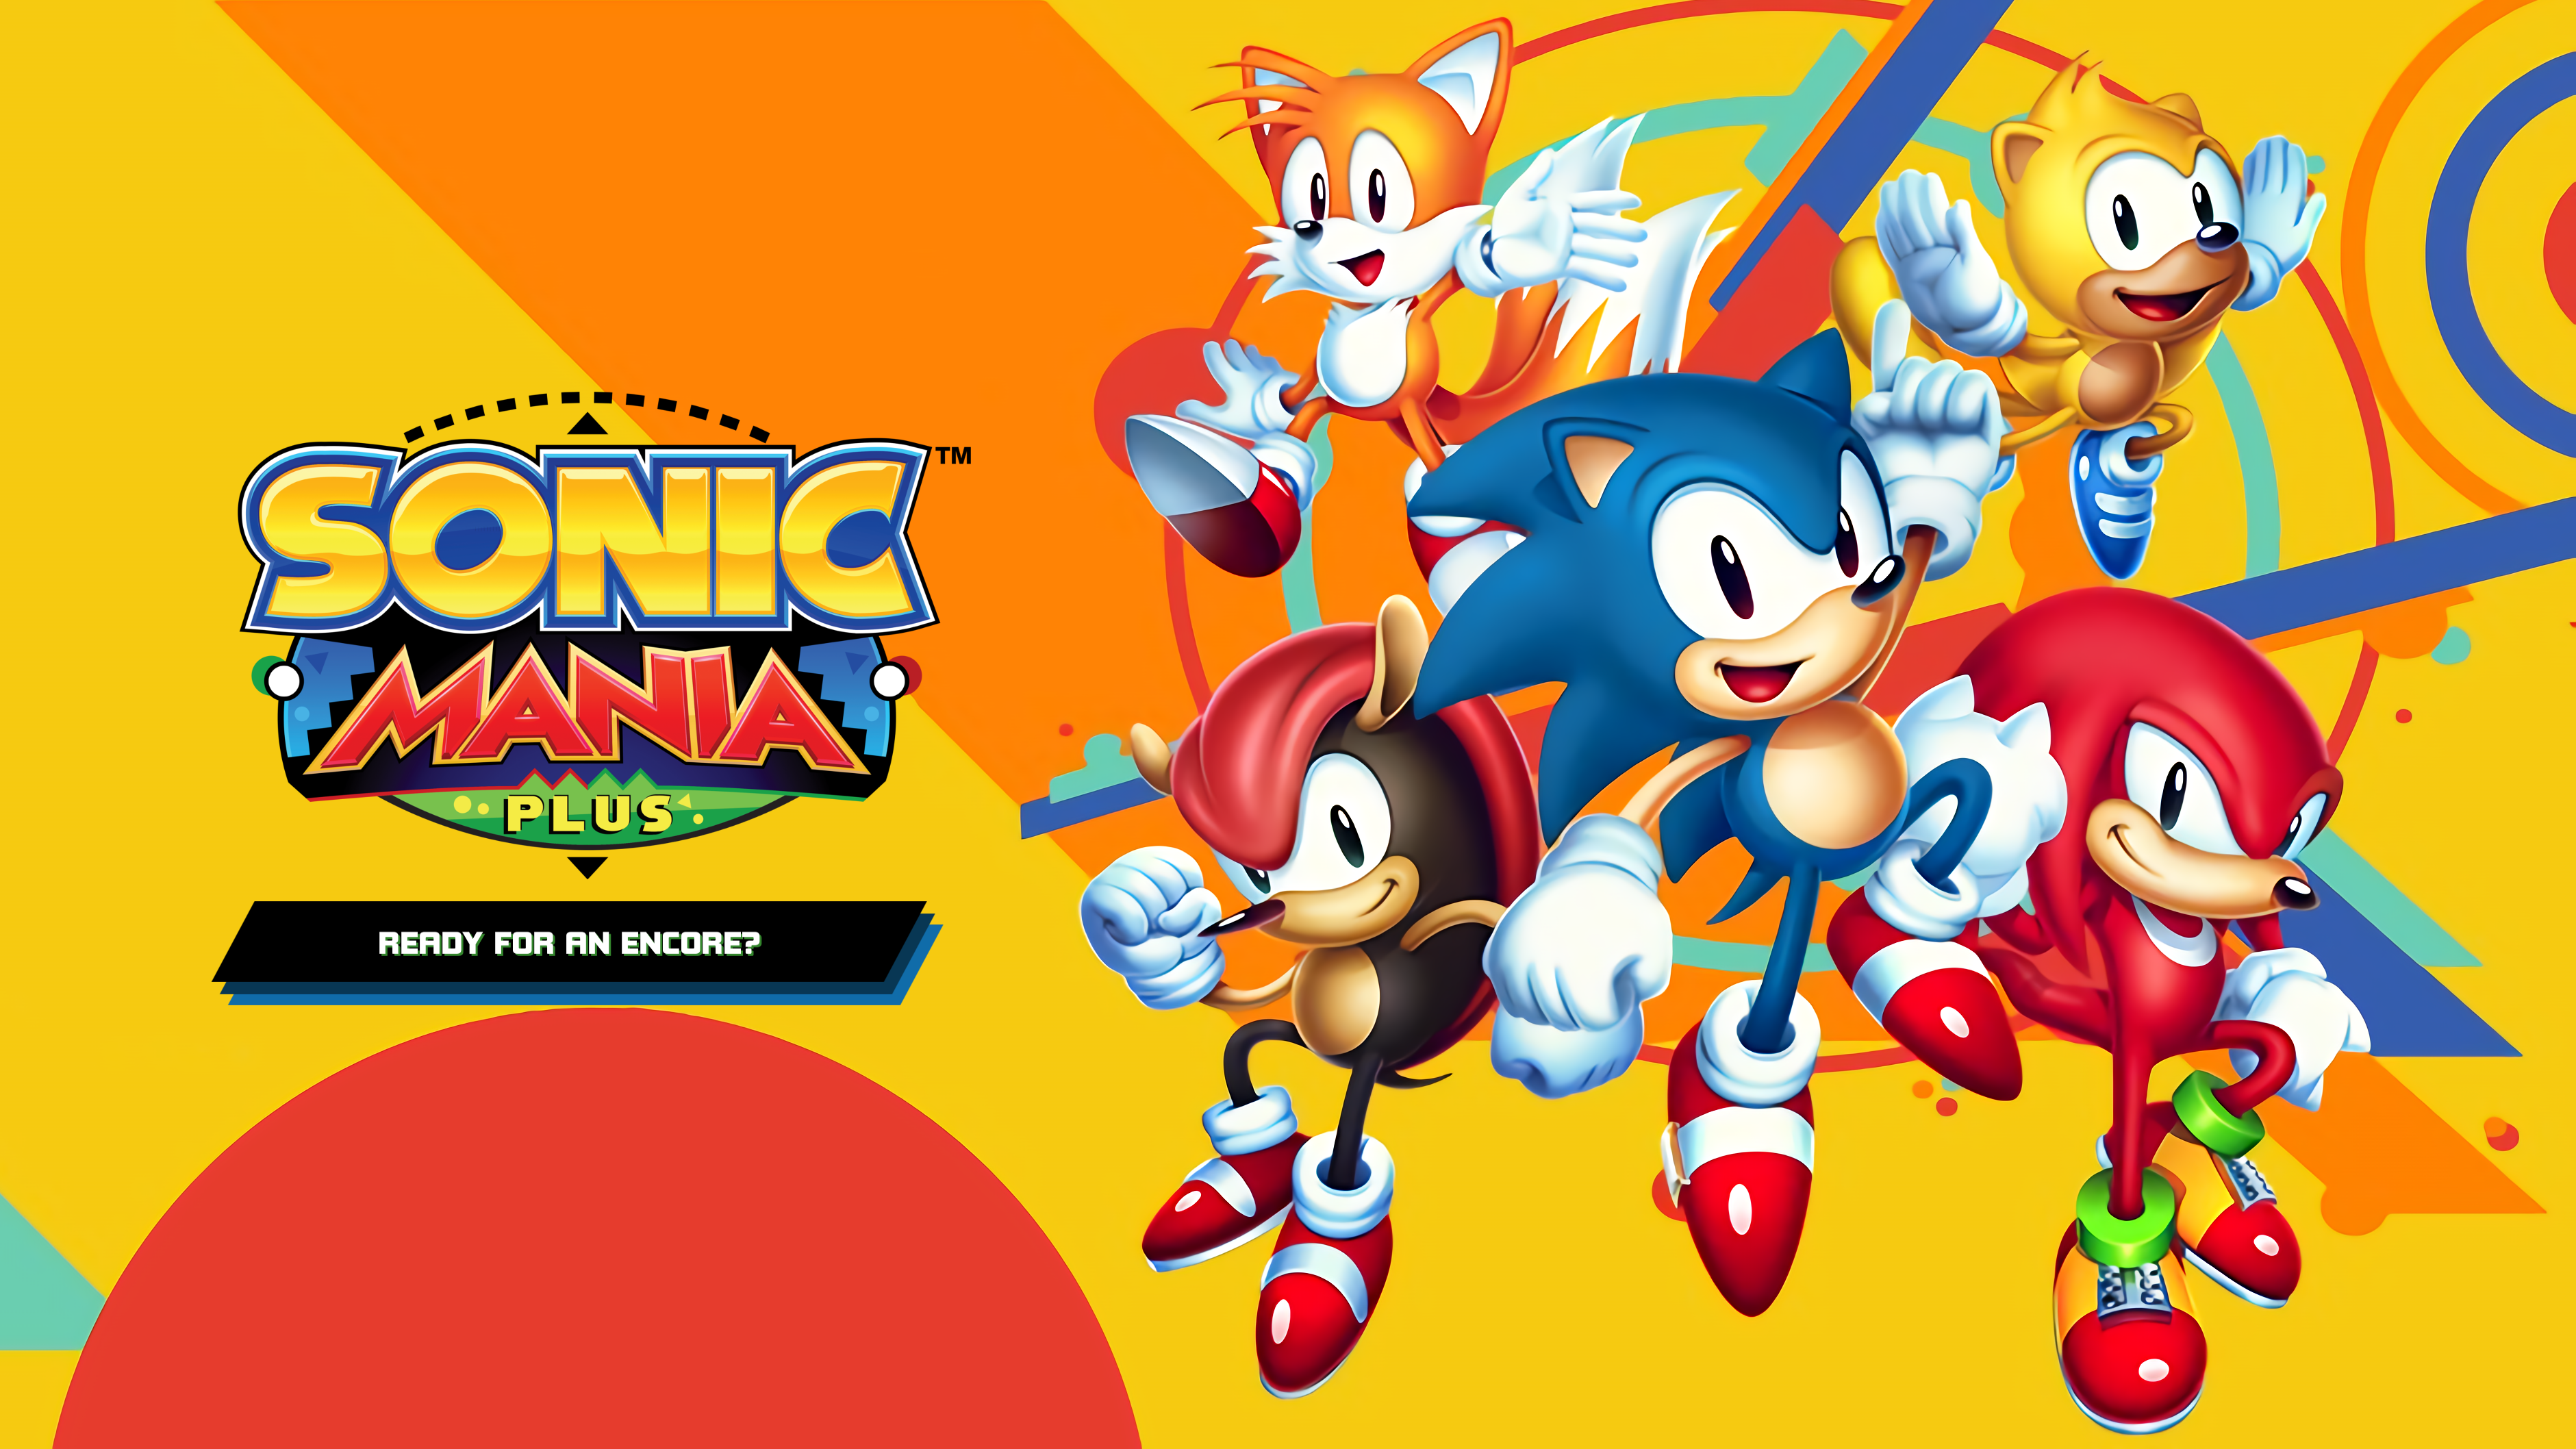 Sonic Sonic The Hedgehog Sonic Mania Adventures Sonic Mania Sega Mighty Tails Character Knuckles Com 3762x2116